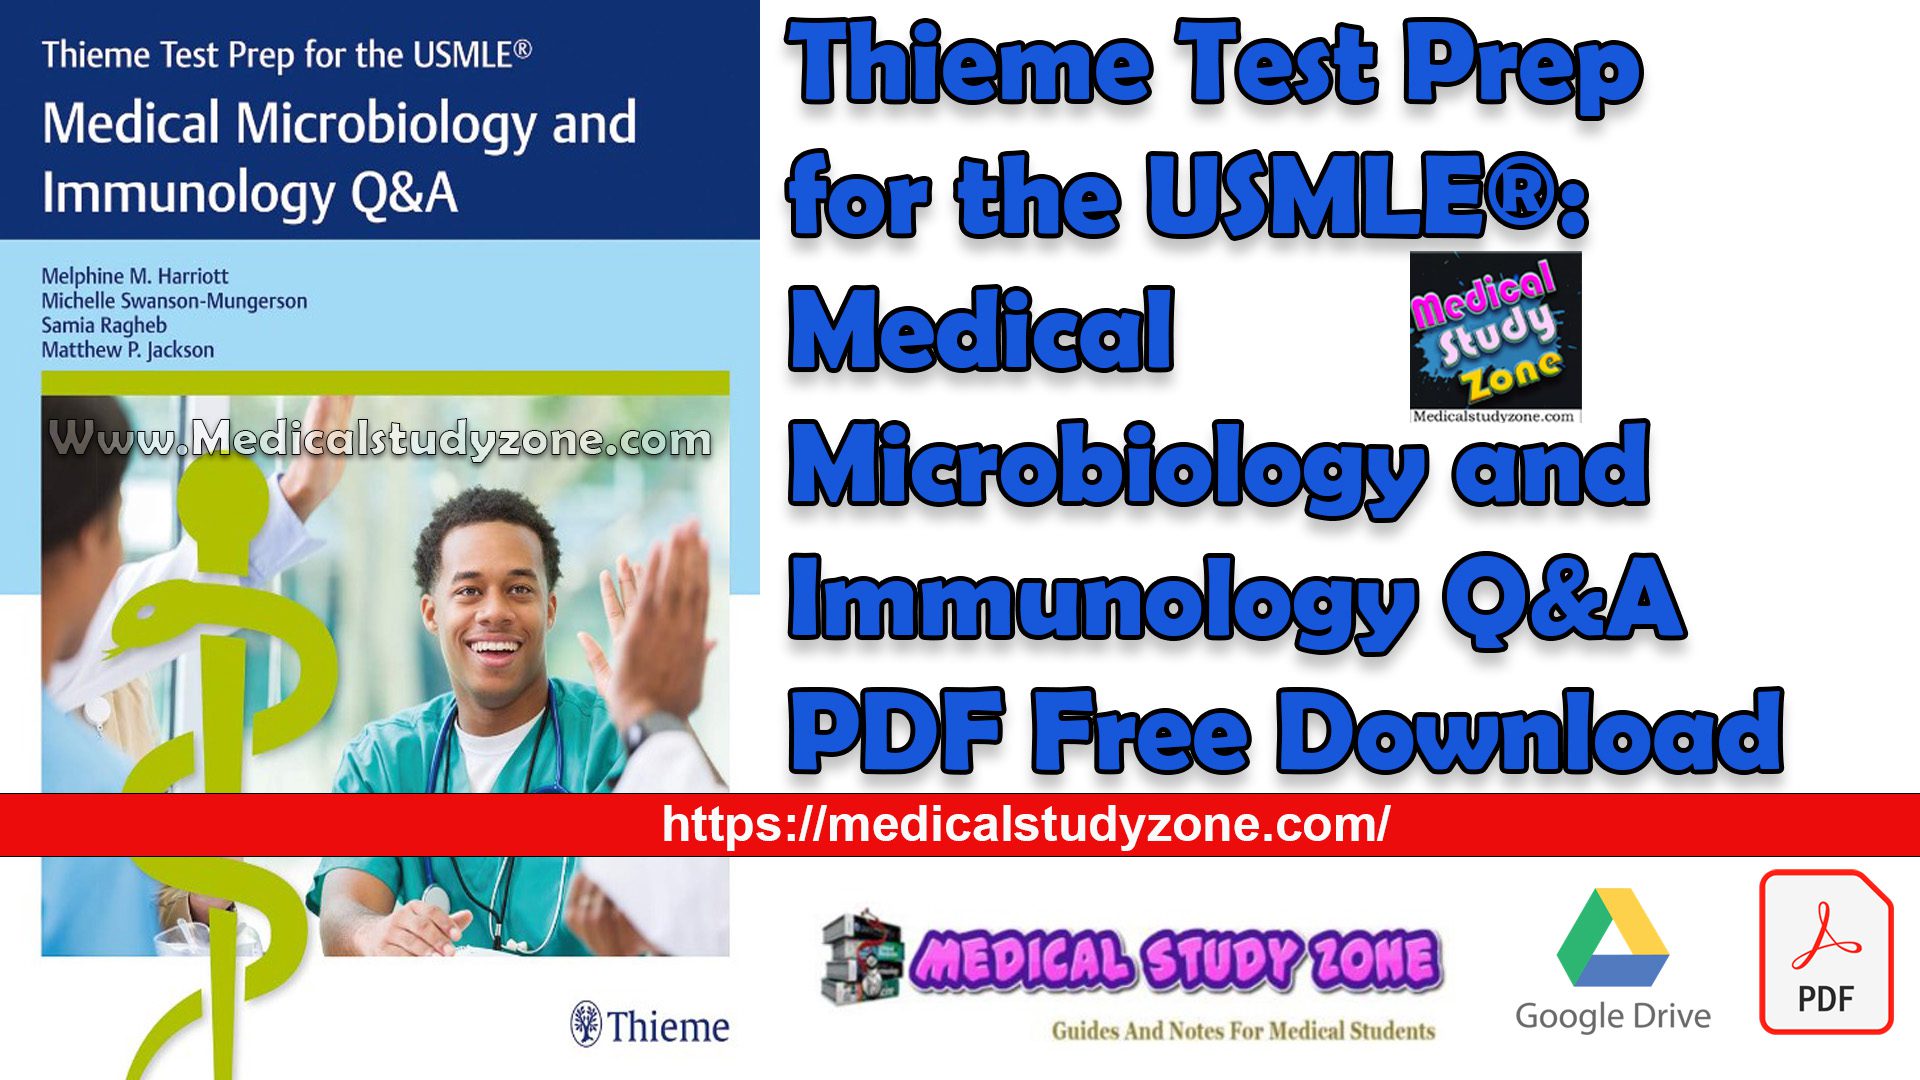 Thieme Test Prep for the USMLE®: Medical Microbiology and Immunology Q&A PDF Free Download